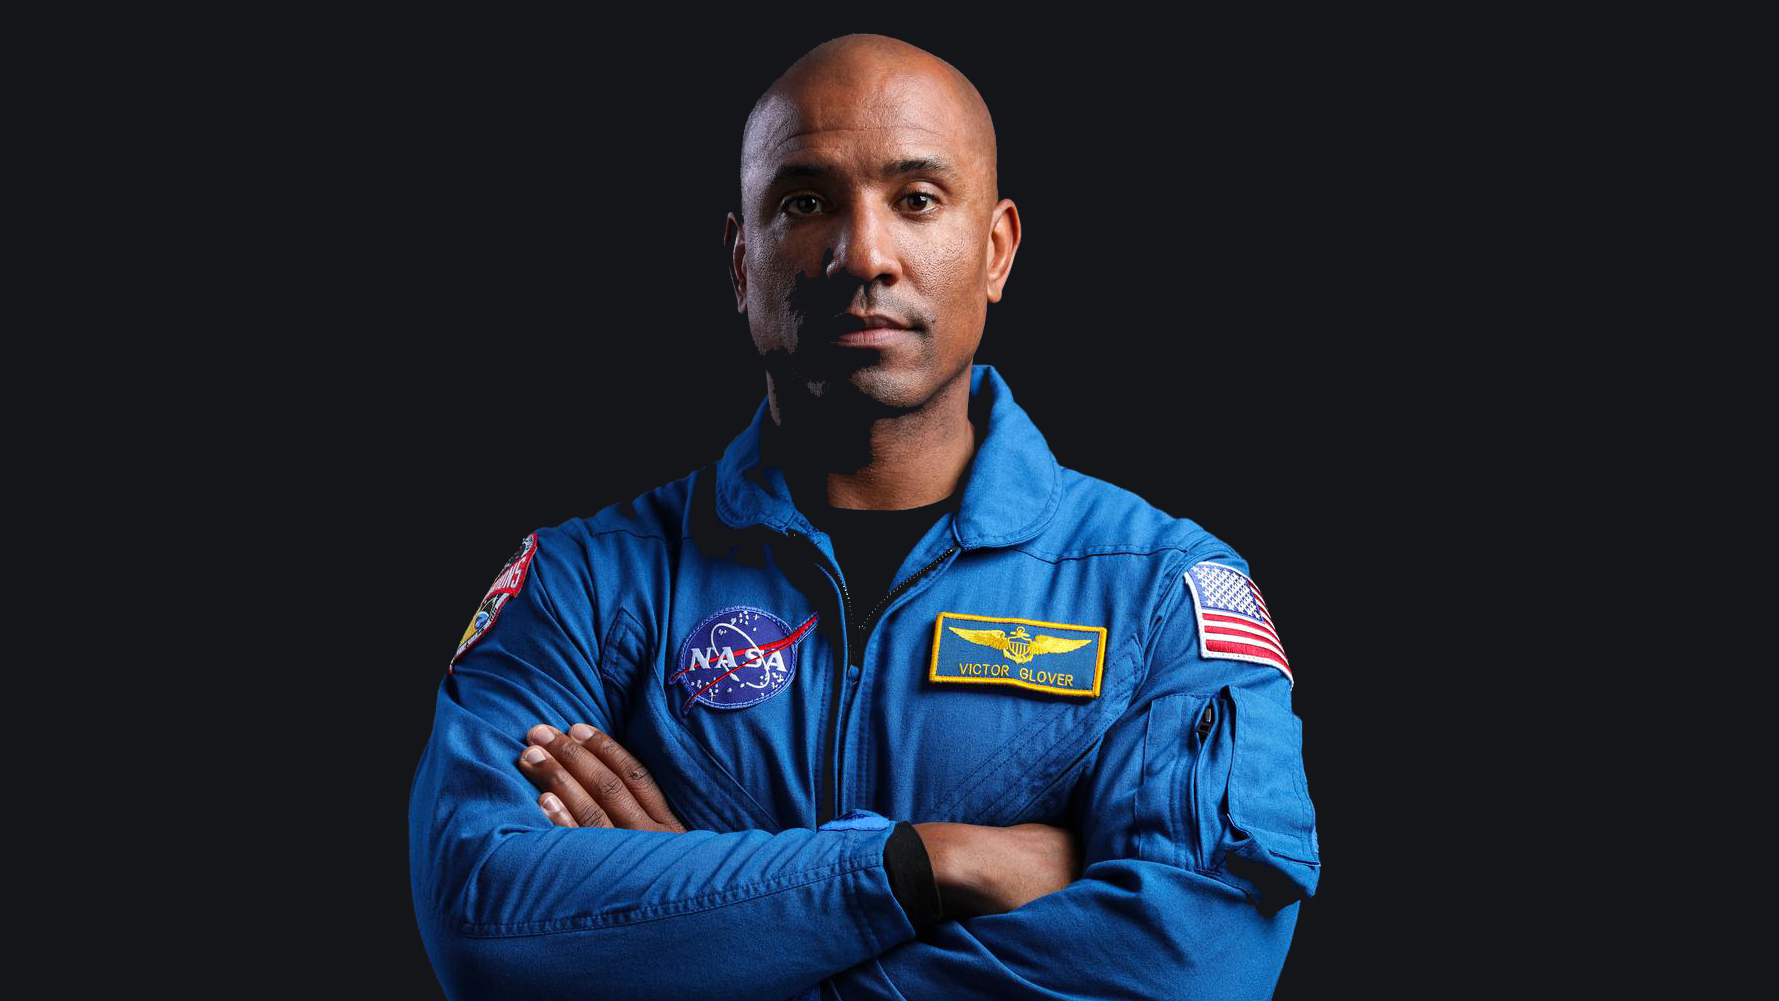 Astronaut Victor Glover on a black background.